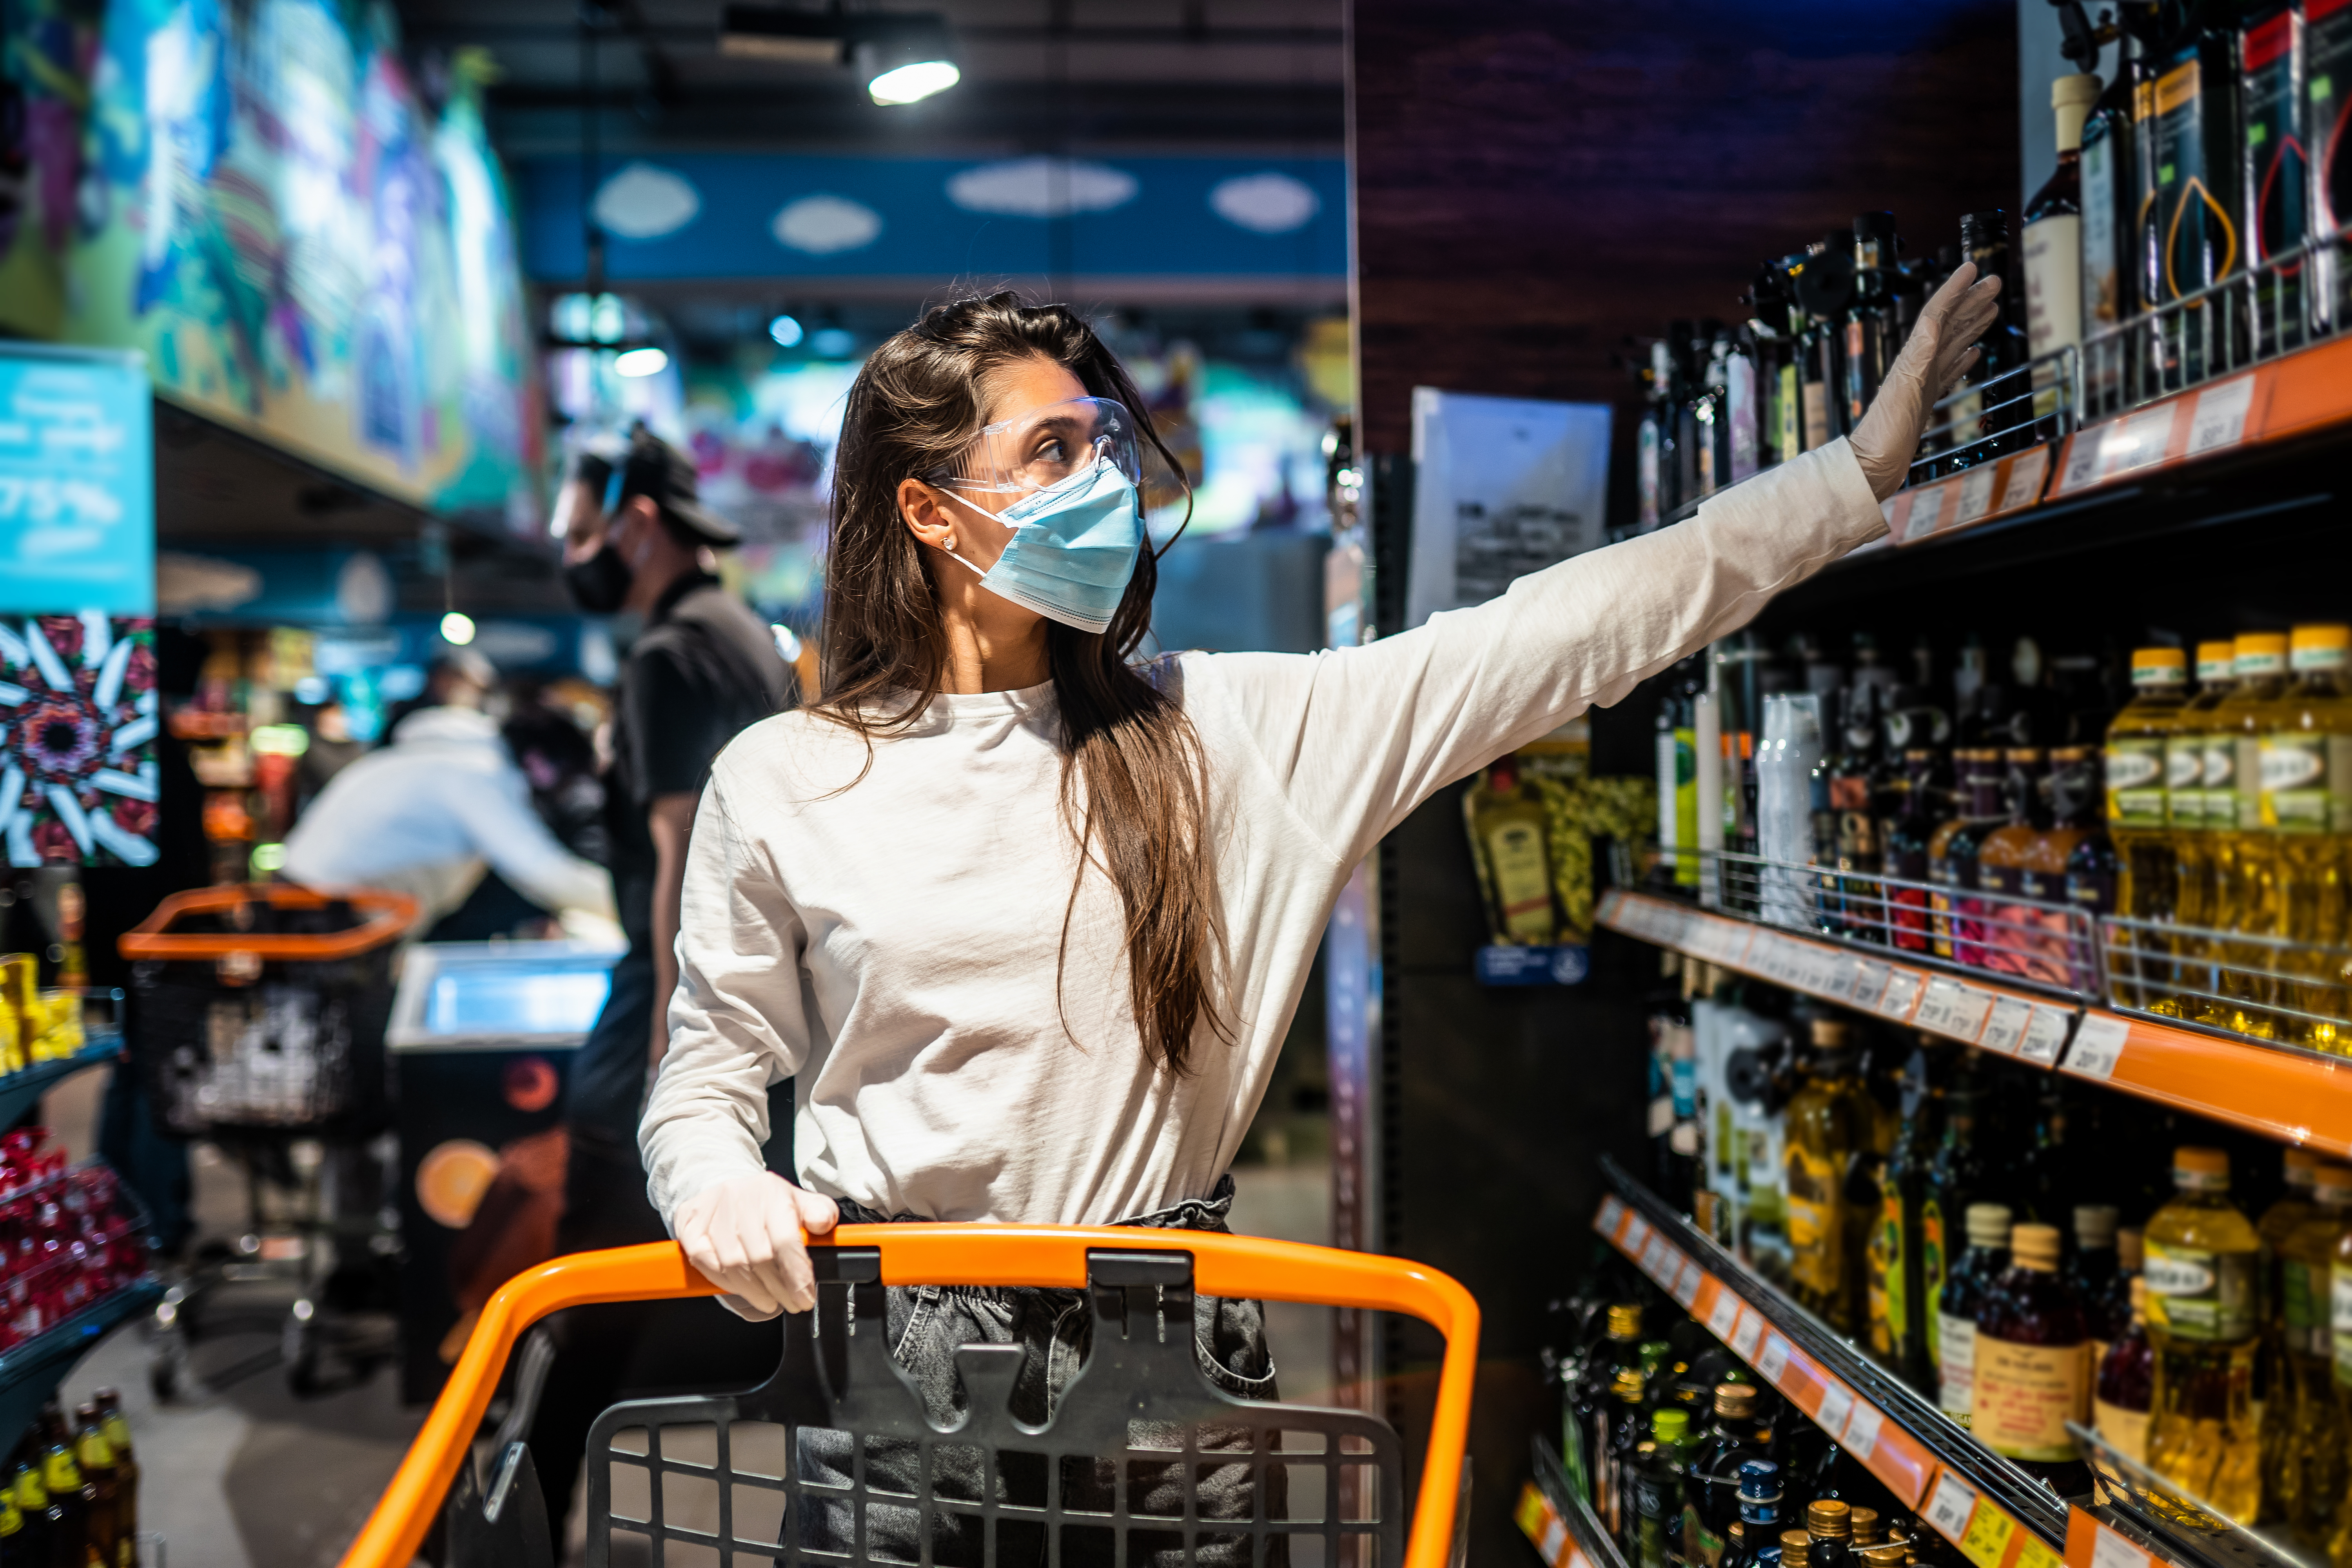 woman-with-the-surgical-mask-and-the-gloves-is-shopping-in-the-supermarket-after-coronavirus-pandemic-the-girl-with-surgical-mask-is-going-to-buy-the-some-food